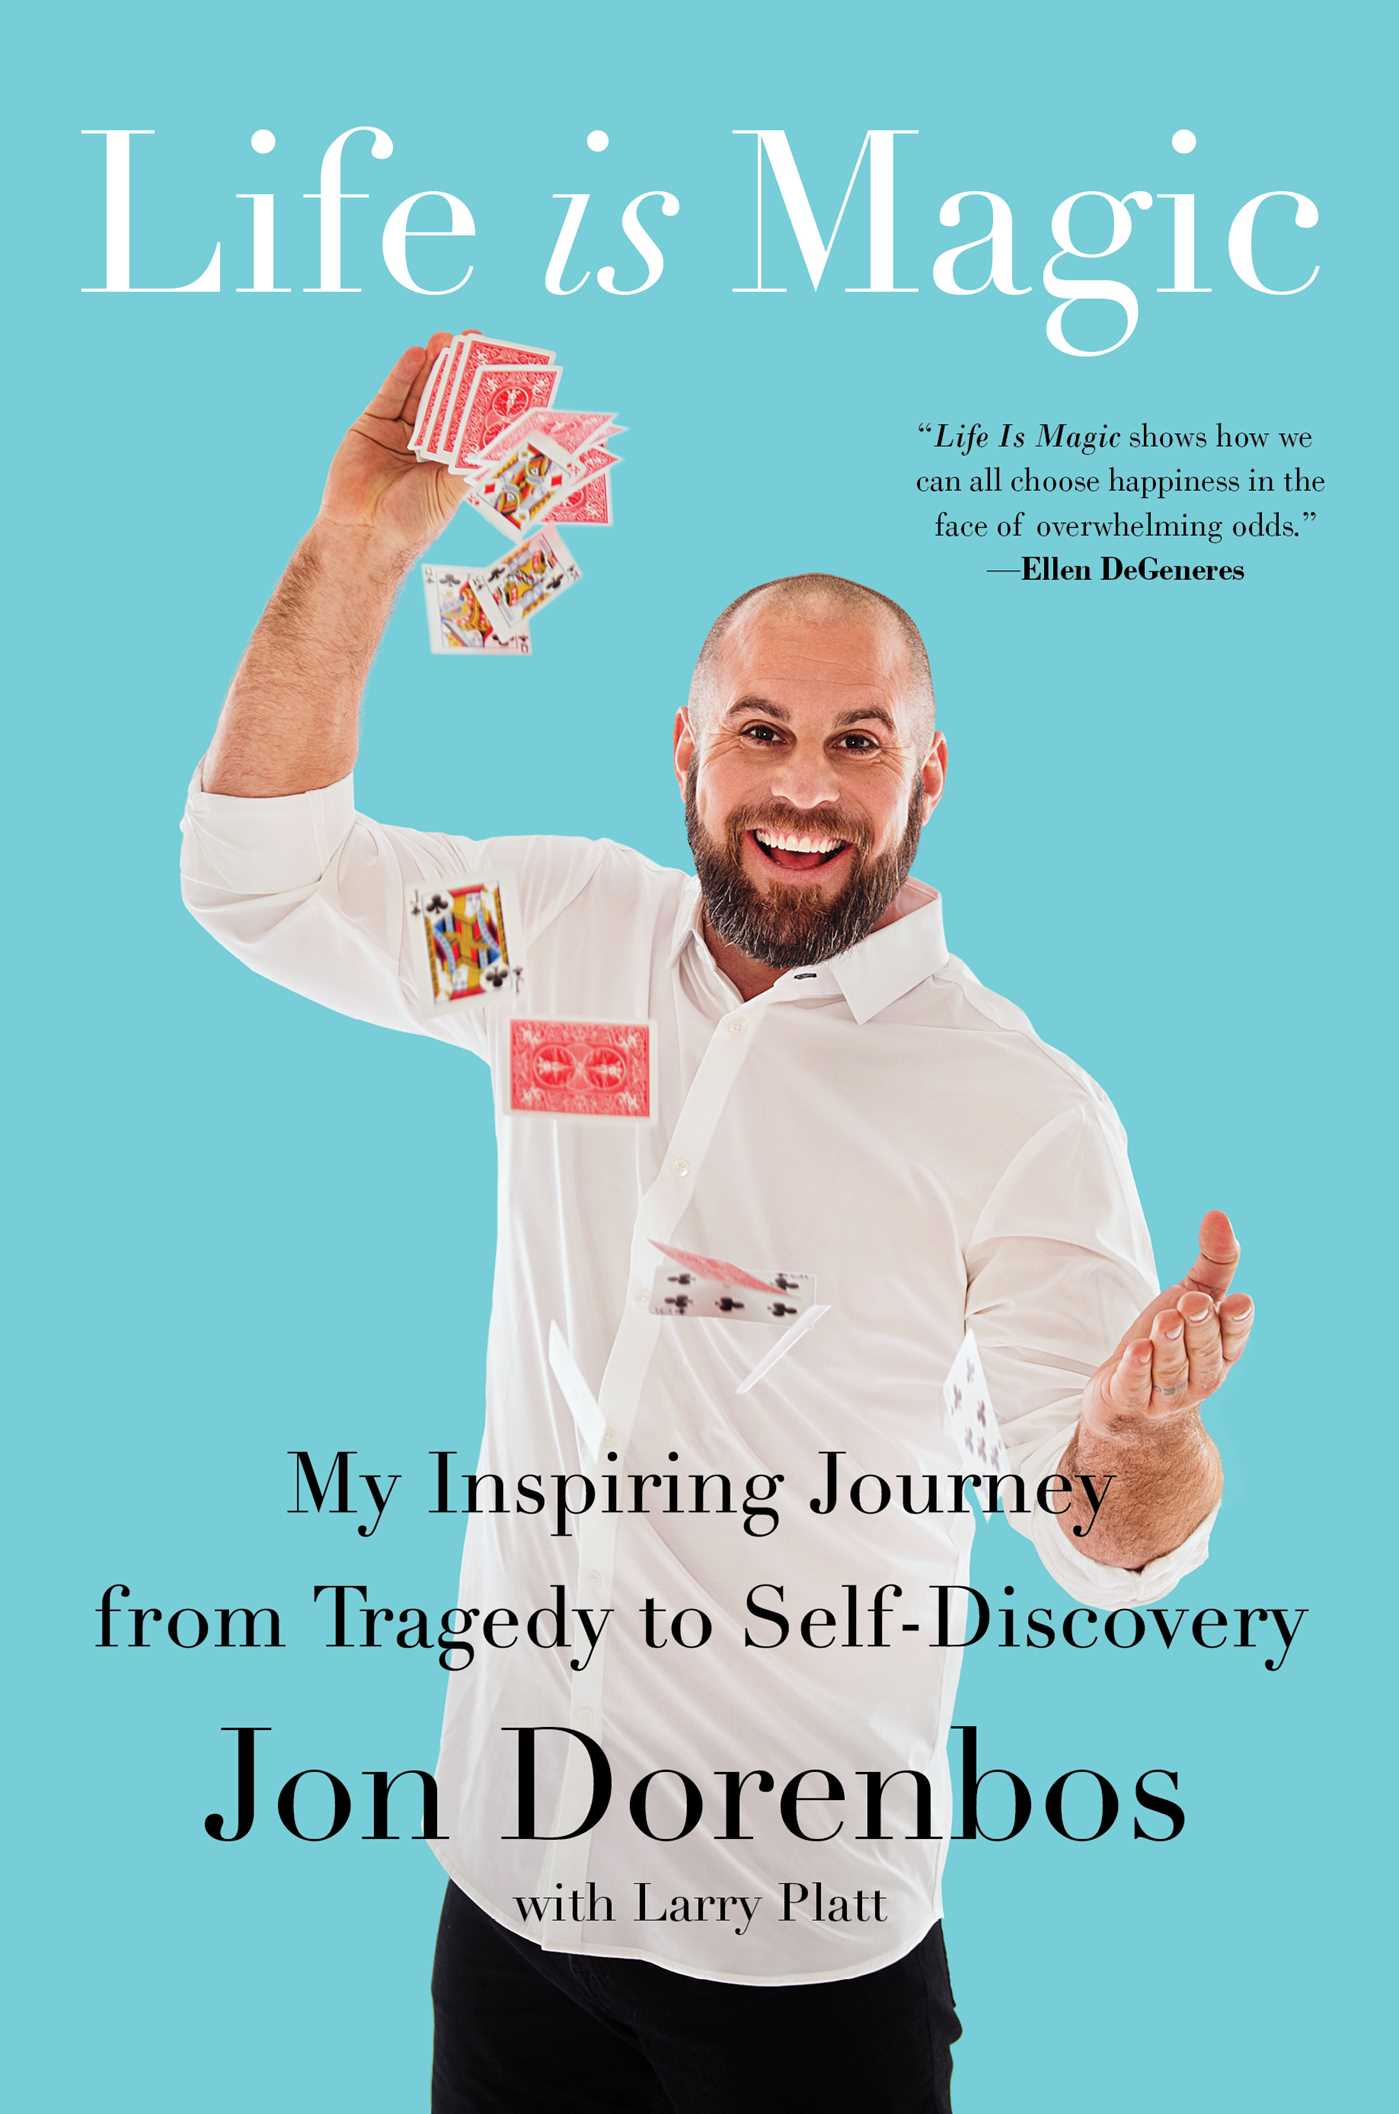 Life is Magic: My Inspiring Journey from Tragedy to Self-Discovery by Jon Dorenbos with Larry Platt